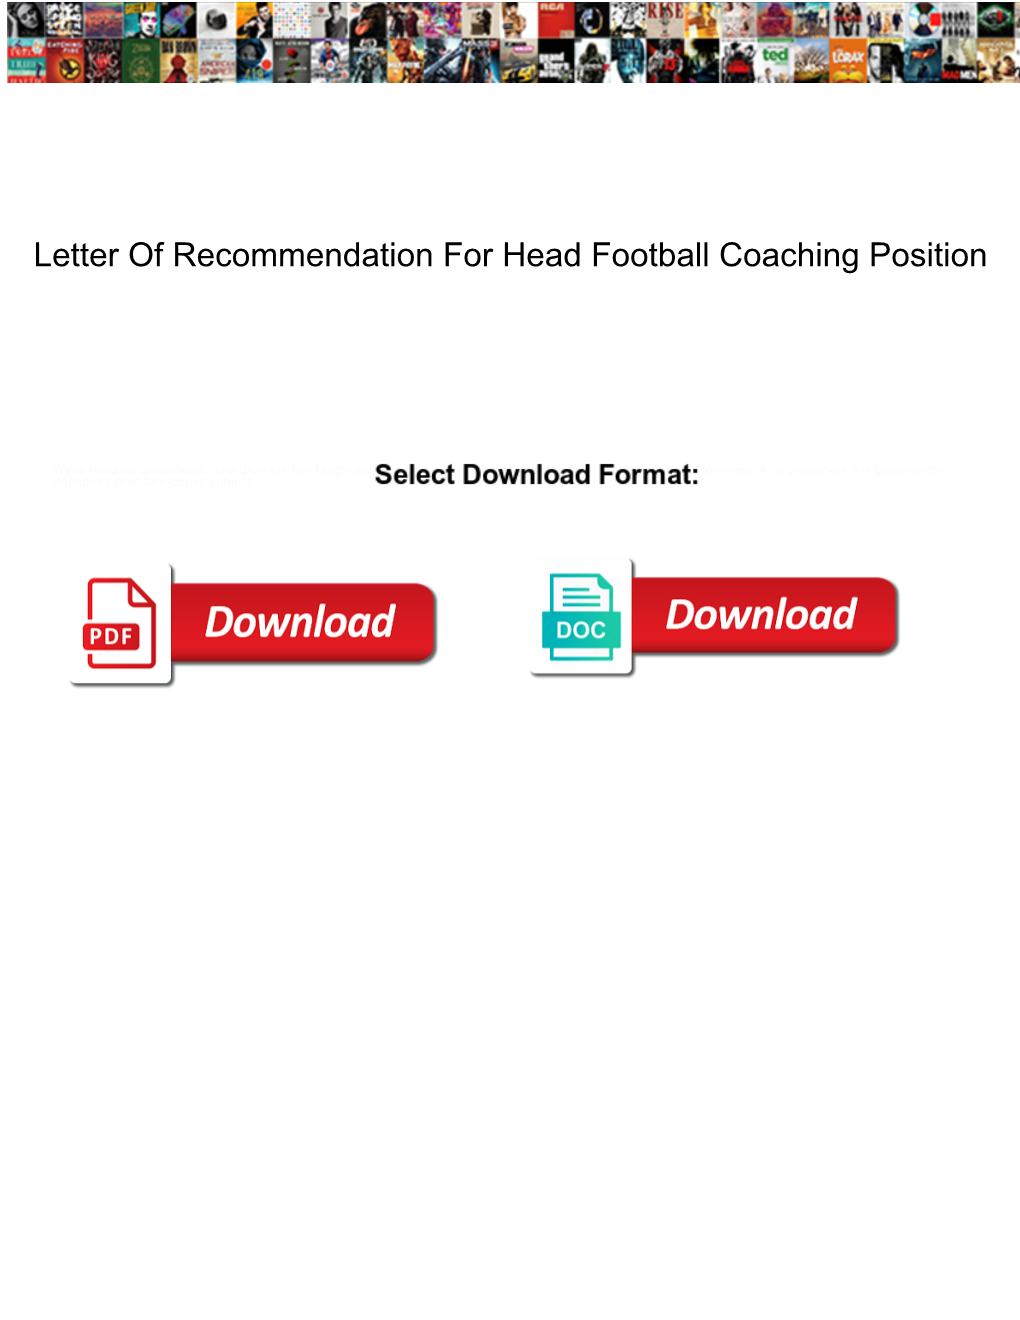 Letter of Recommendation for Head Football Coaching Position